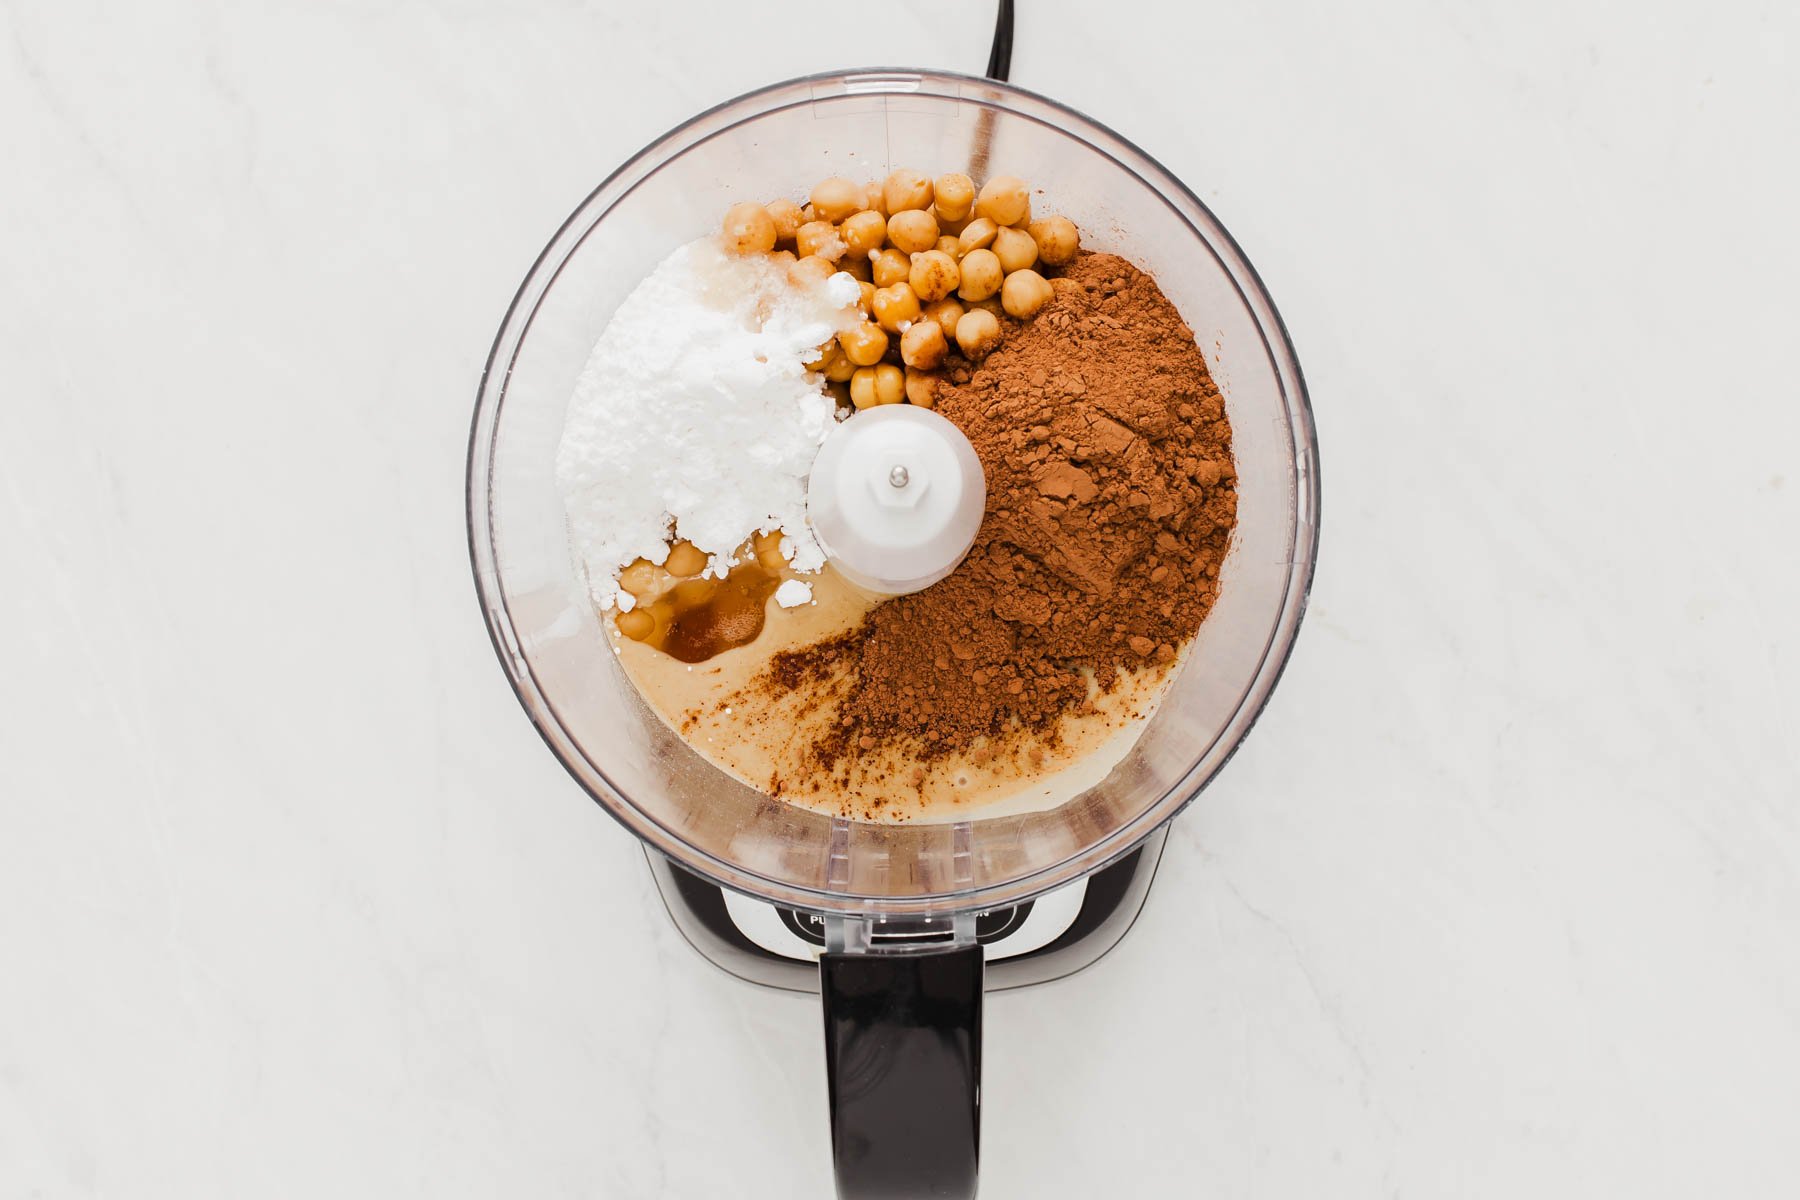 Food processor bowl with chickpeas, cocoa powder and powdered sugar.